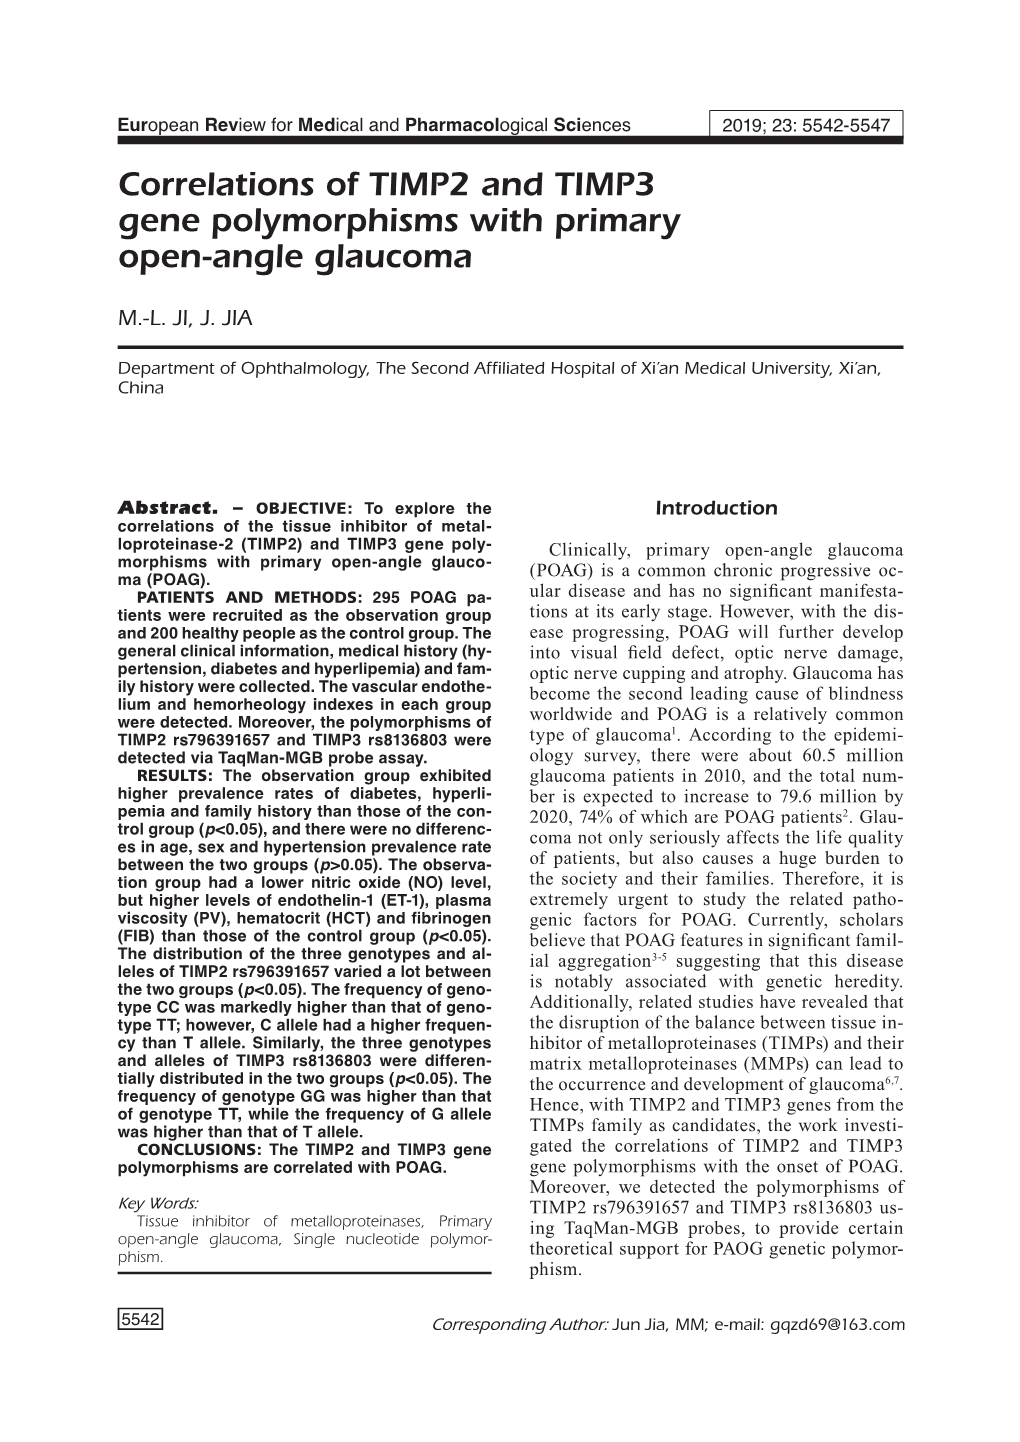 Correlations of TIMP2 and TIMP3 Gene Polymorphisms with Primary Open-Angle Glaucoma